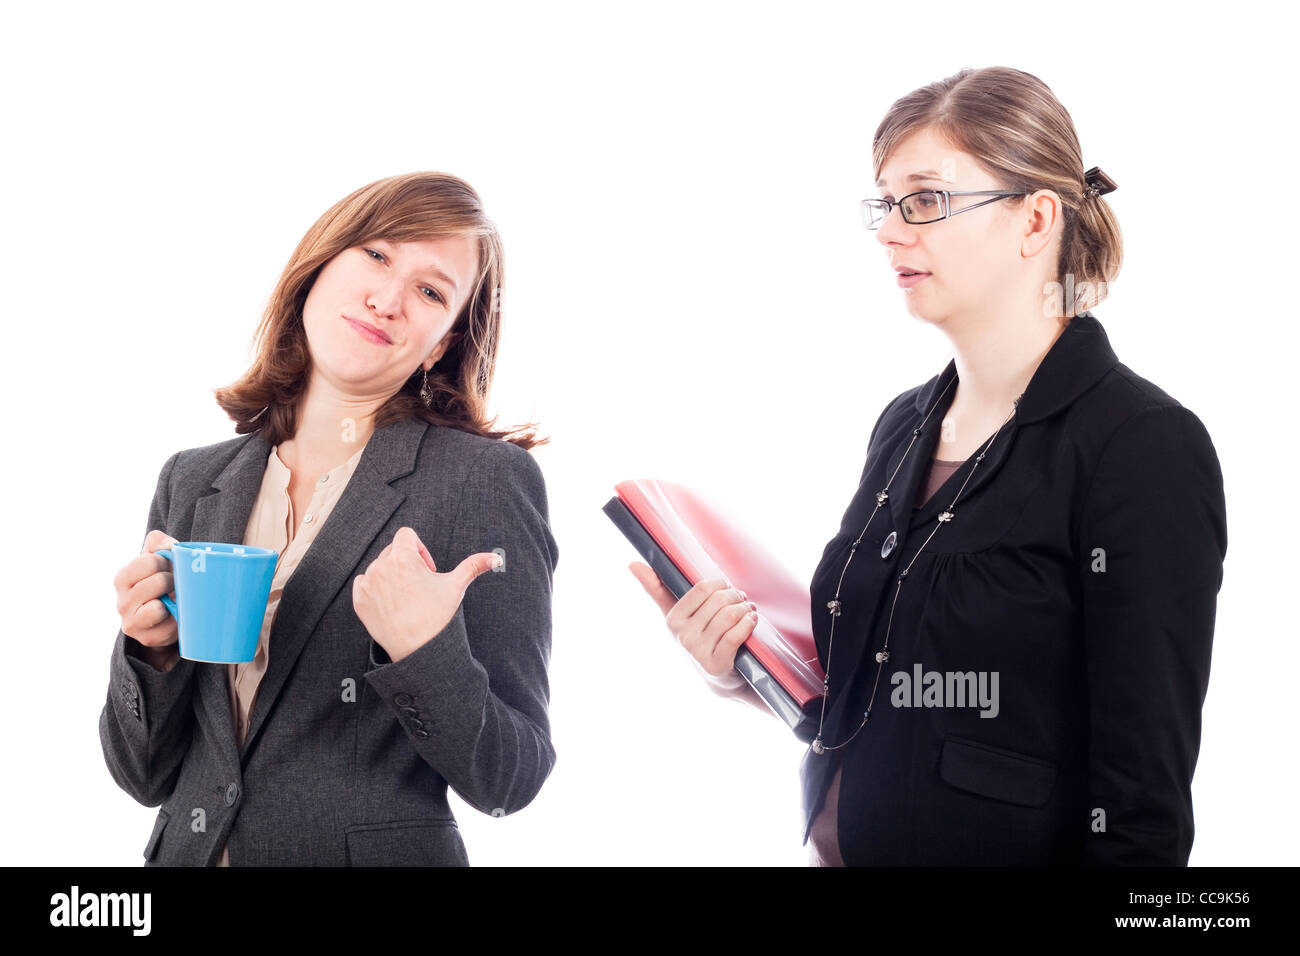 Two business women colleagues rivalry concept, isolated on white background. Stock Photo